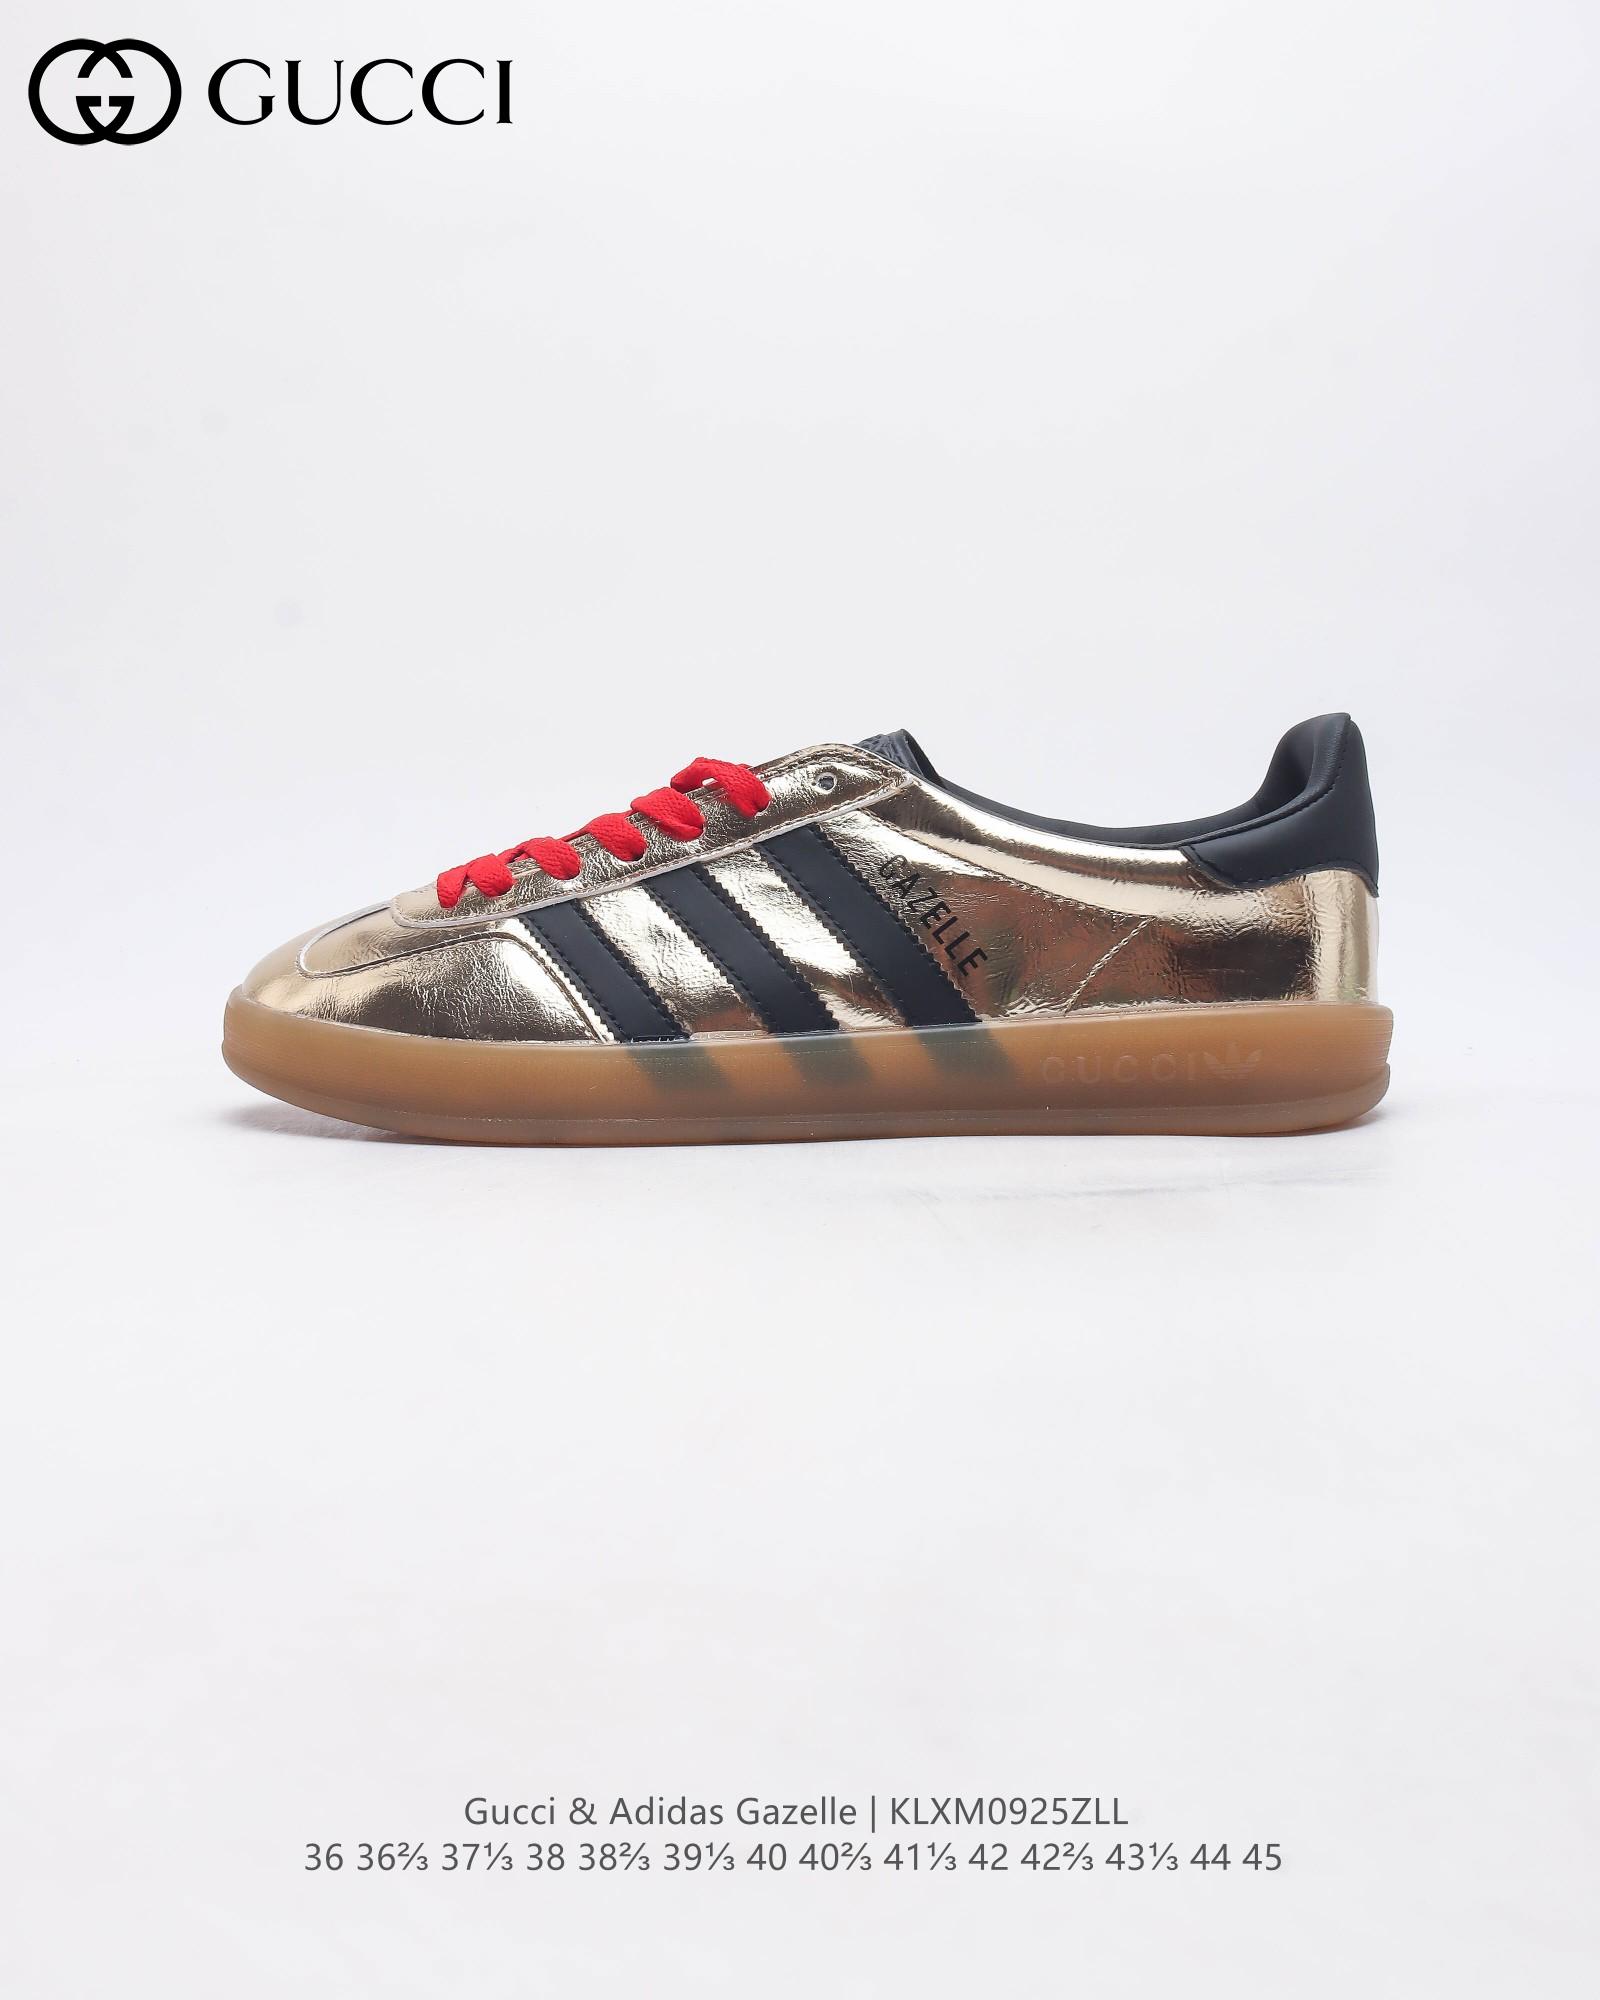 Adidas X Gucci Gazelle Leather Metallic Gold Low Top, 44% OFF